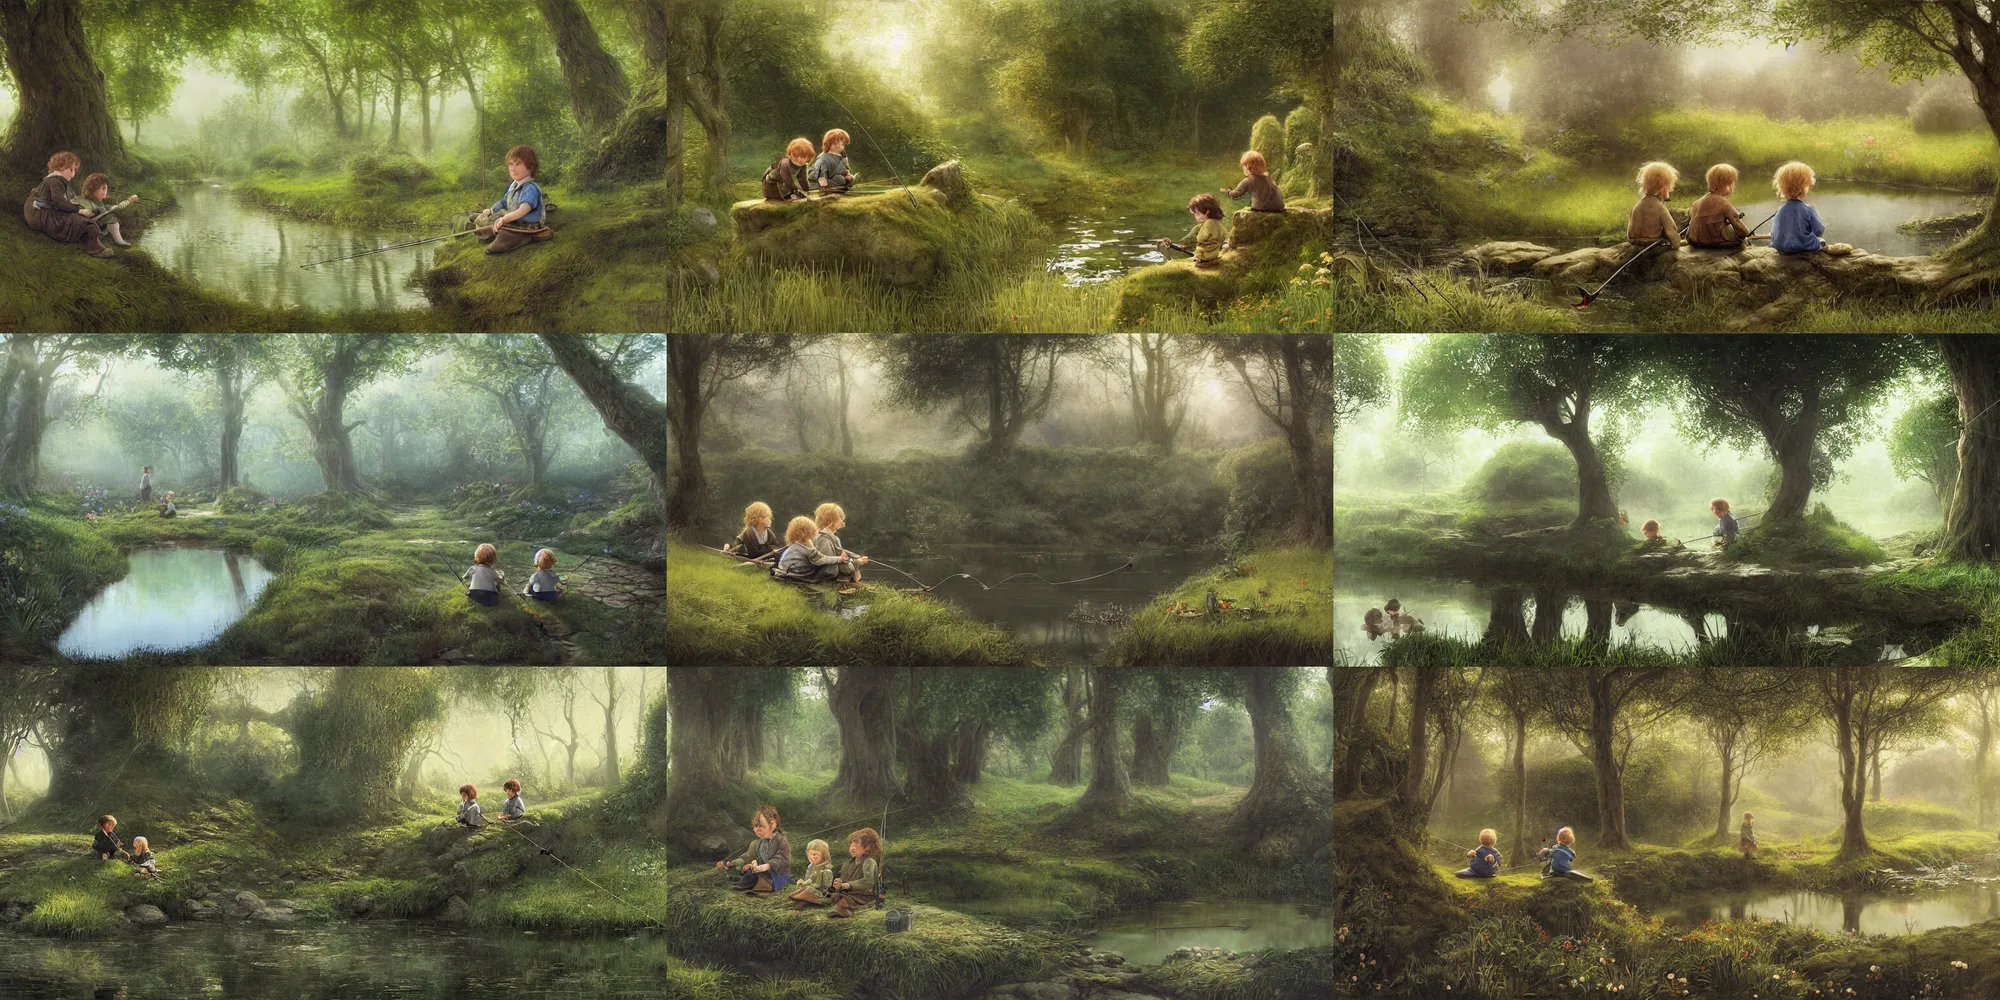 Prompt: two hobbit children sit with fishing poles near a mirror like pond, by alan lee, springtime flowers and foliage, dark foggy forest background, sunlight filtering through the trees, digital art, art station.